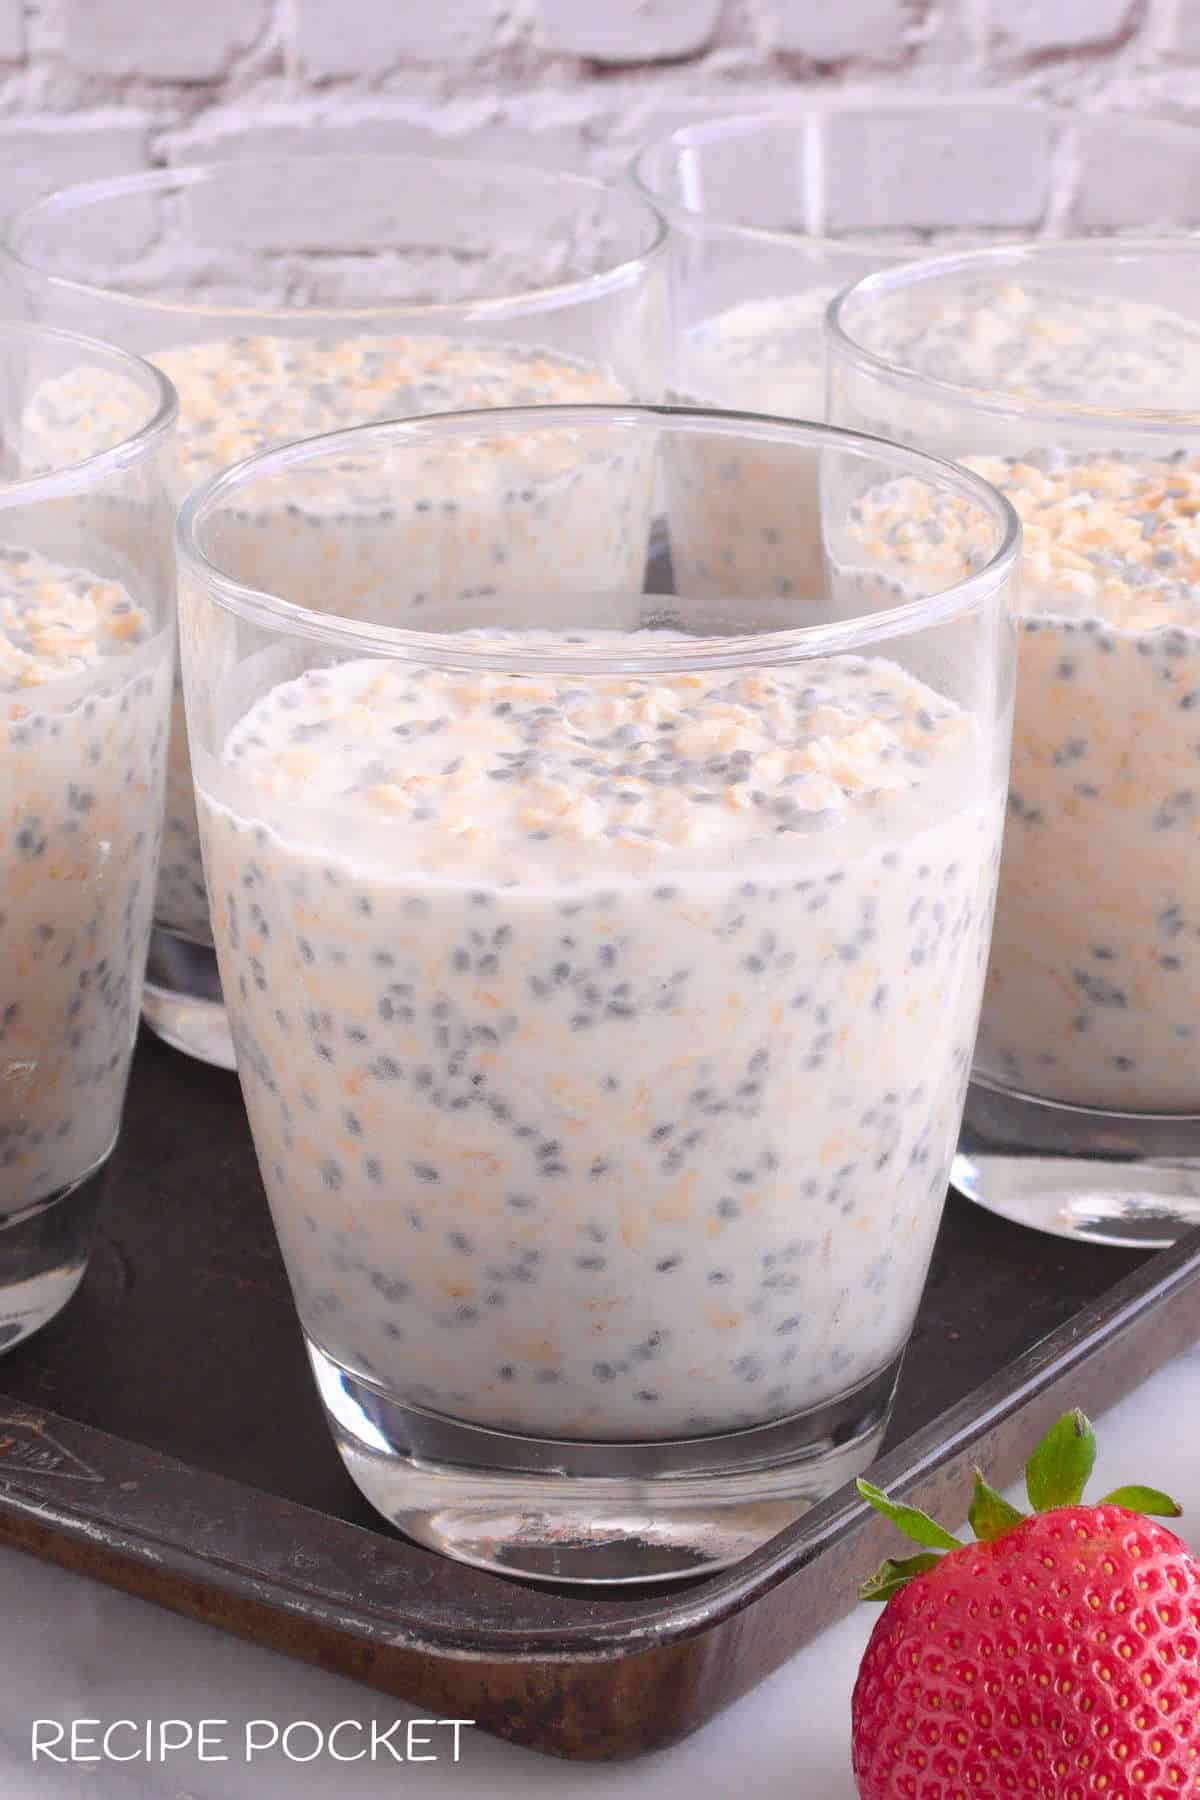 Close up of overnight oats in a glass container.